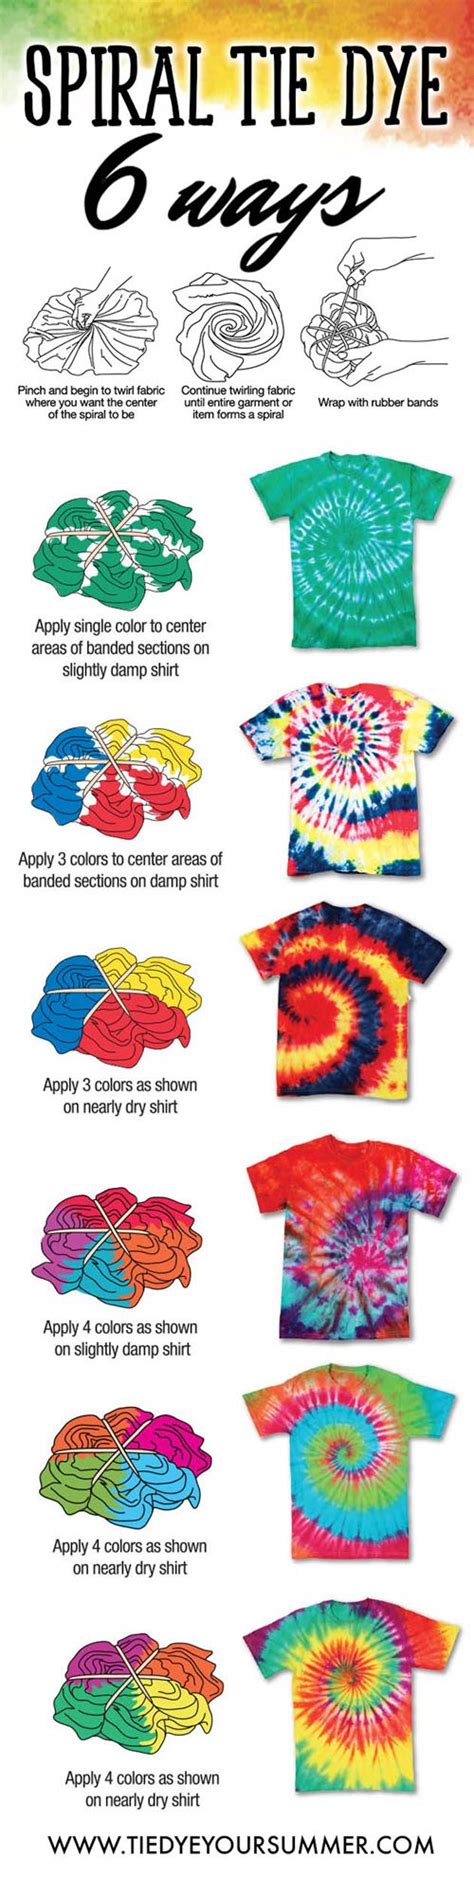 How To Make A Swirl Tie Dye Shirt Repeat Step 2 Five Times In